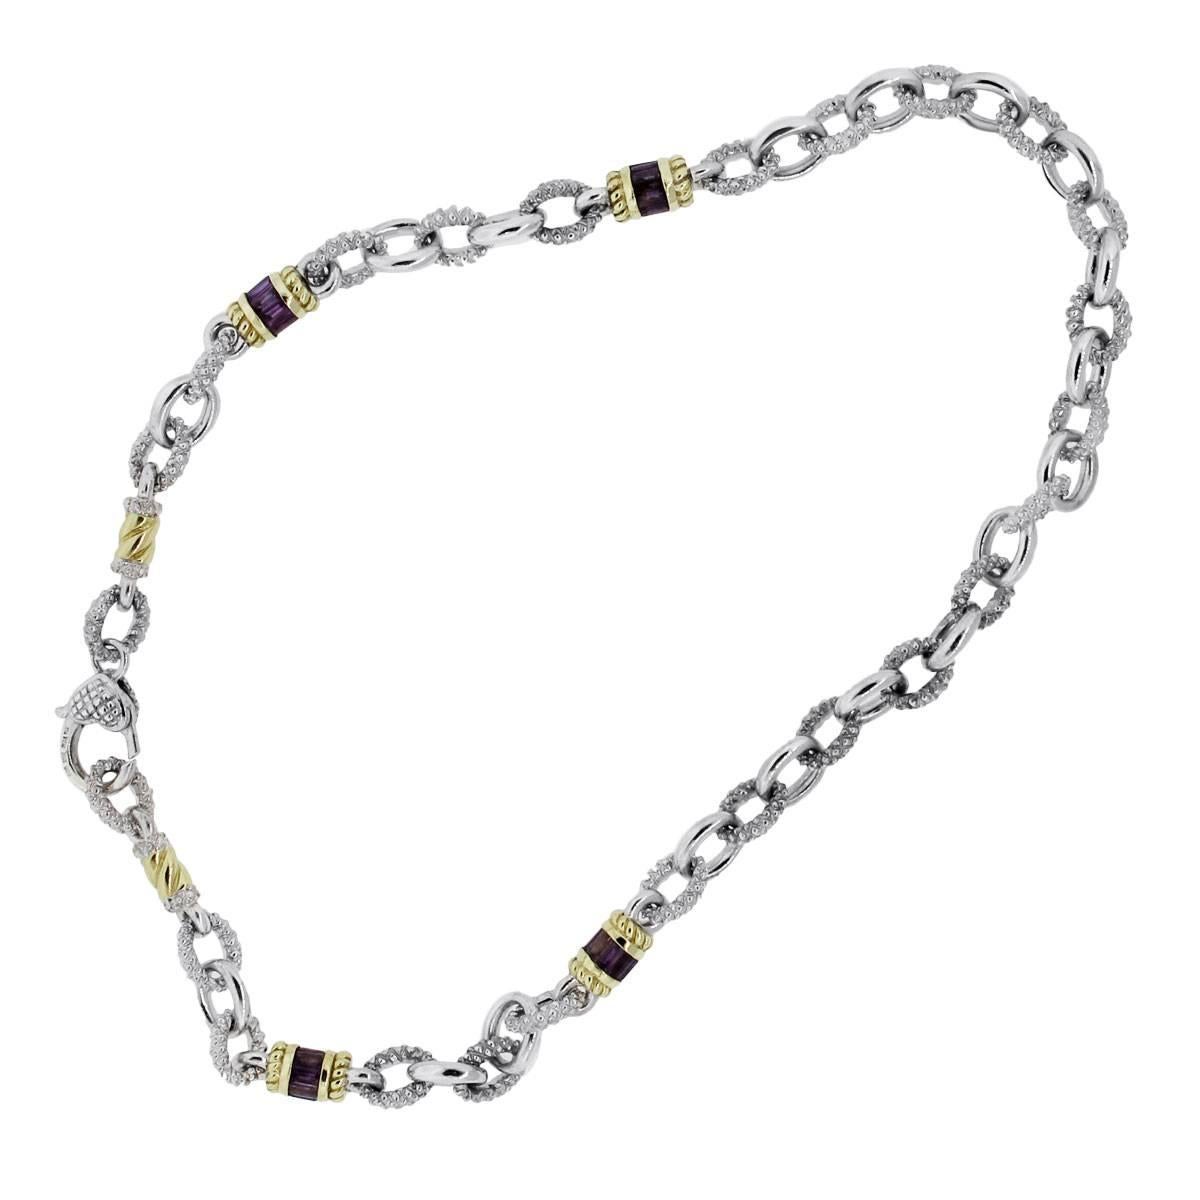 Style: Judith Ripka Sterling Silver and 18k Yellow Gold Amethyst Necklace
Material: Sterling Silver and 18k Yellow Gold
Gemstone Details: Baguette shape Amethyst gemstones
Measurements: 17